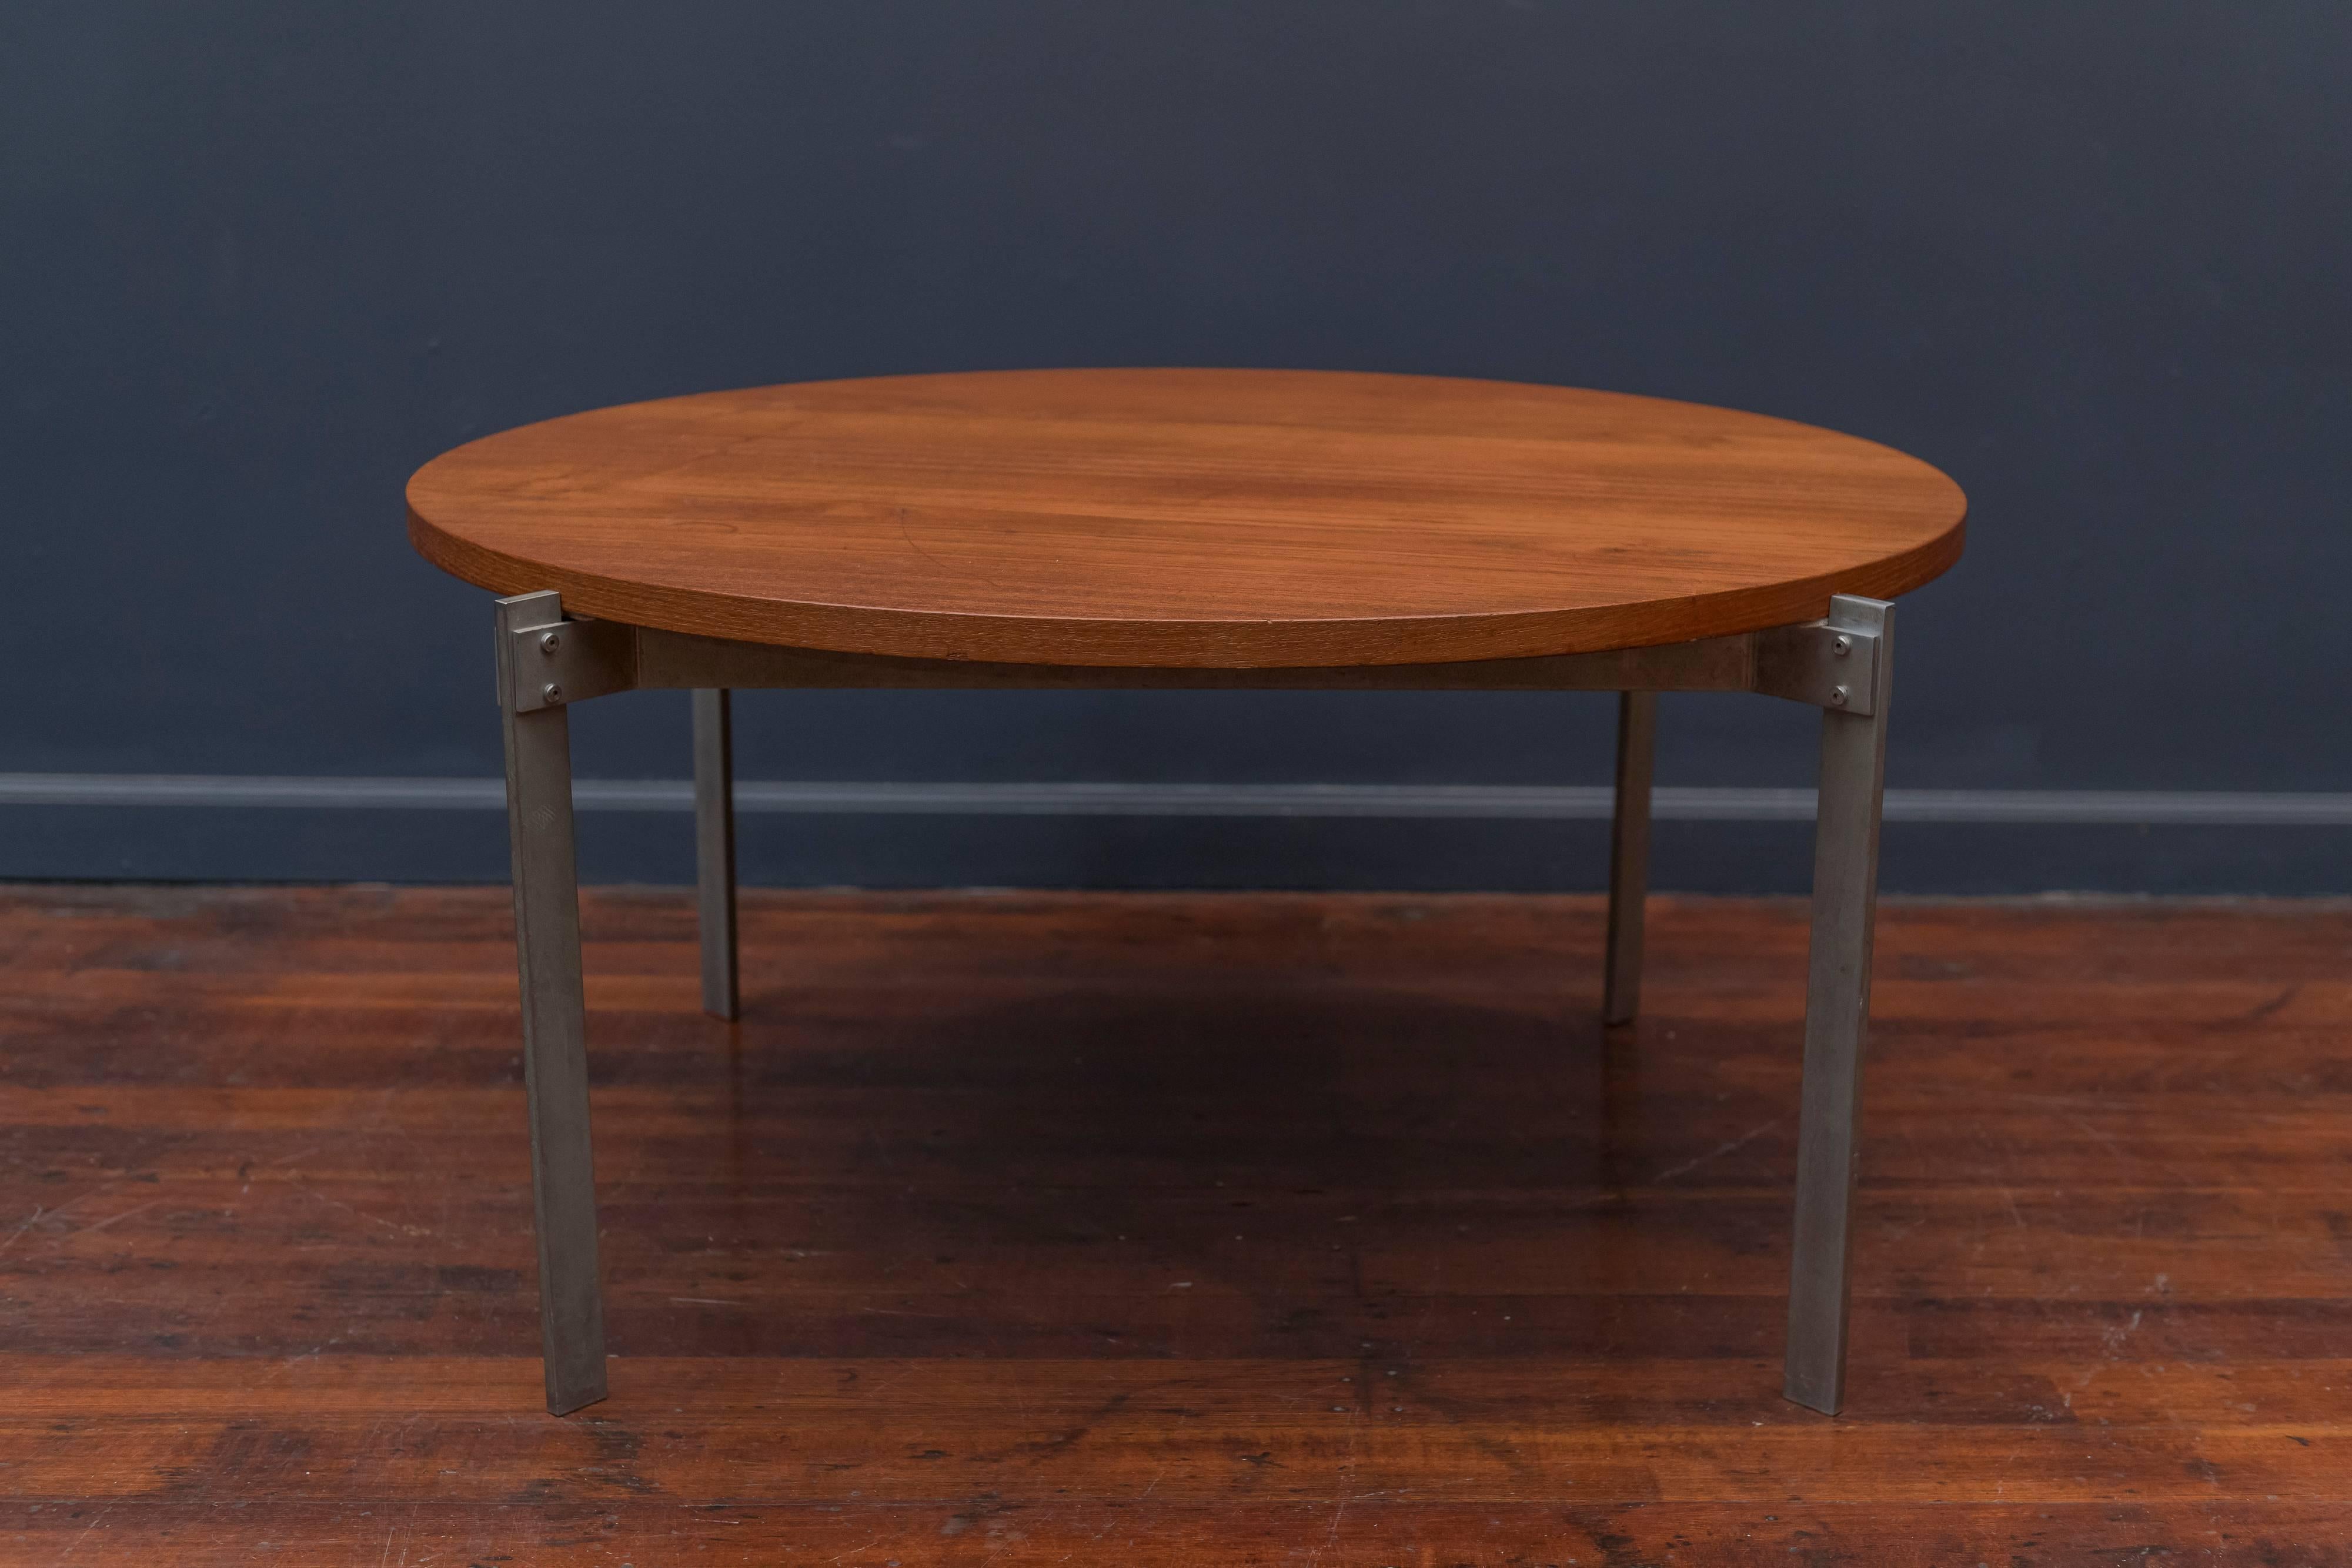 Unusual Danish teak and metal round coffee table. High quality craftsmanship and design in very good original condition with a light patina to the metal base.